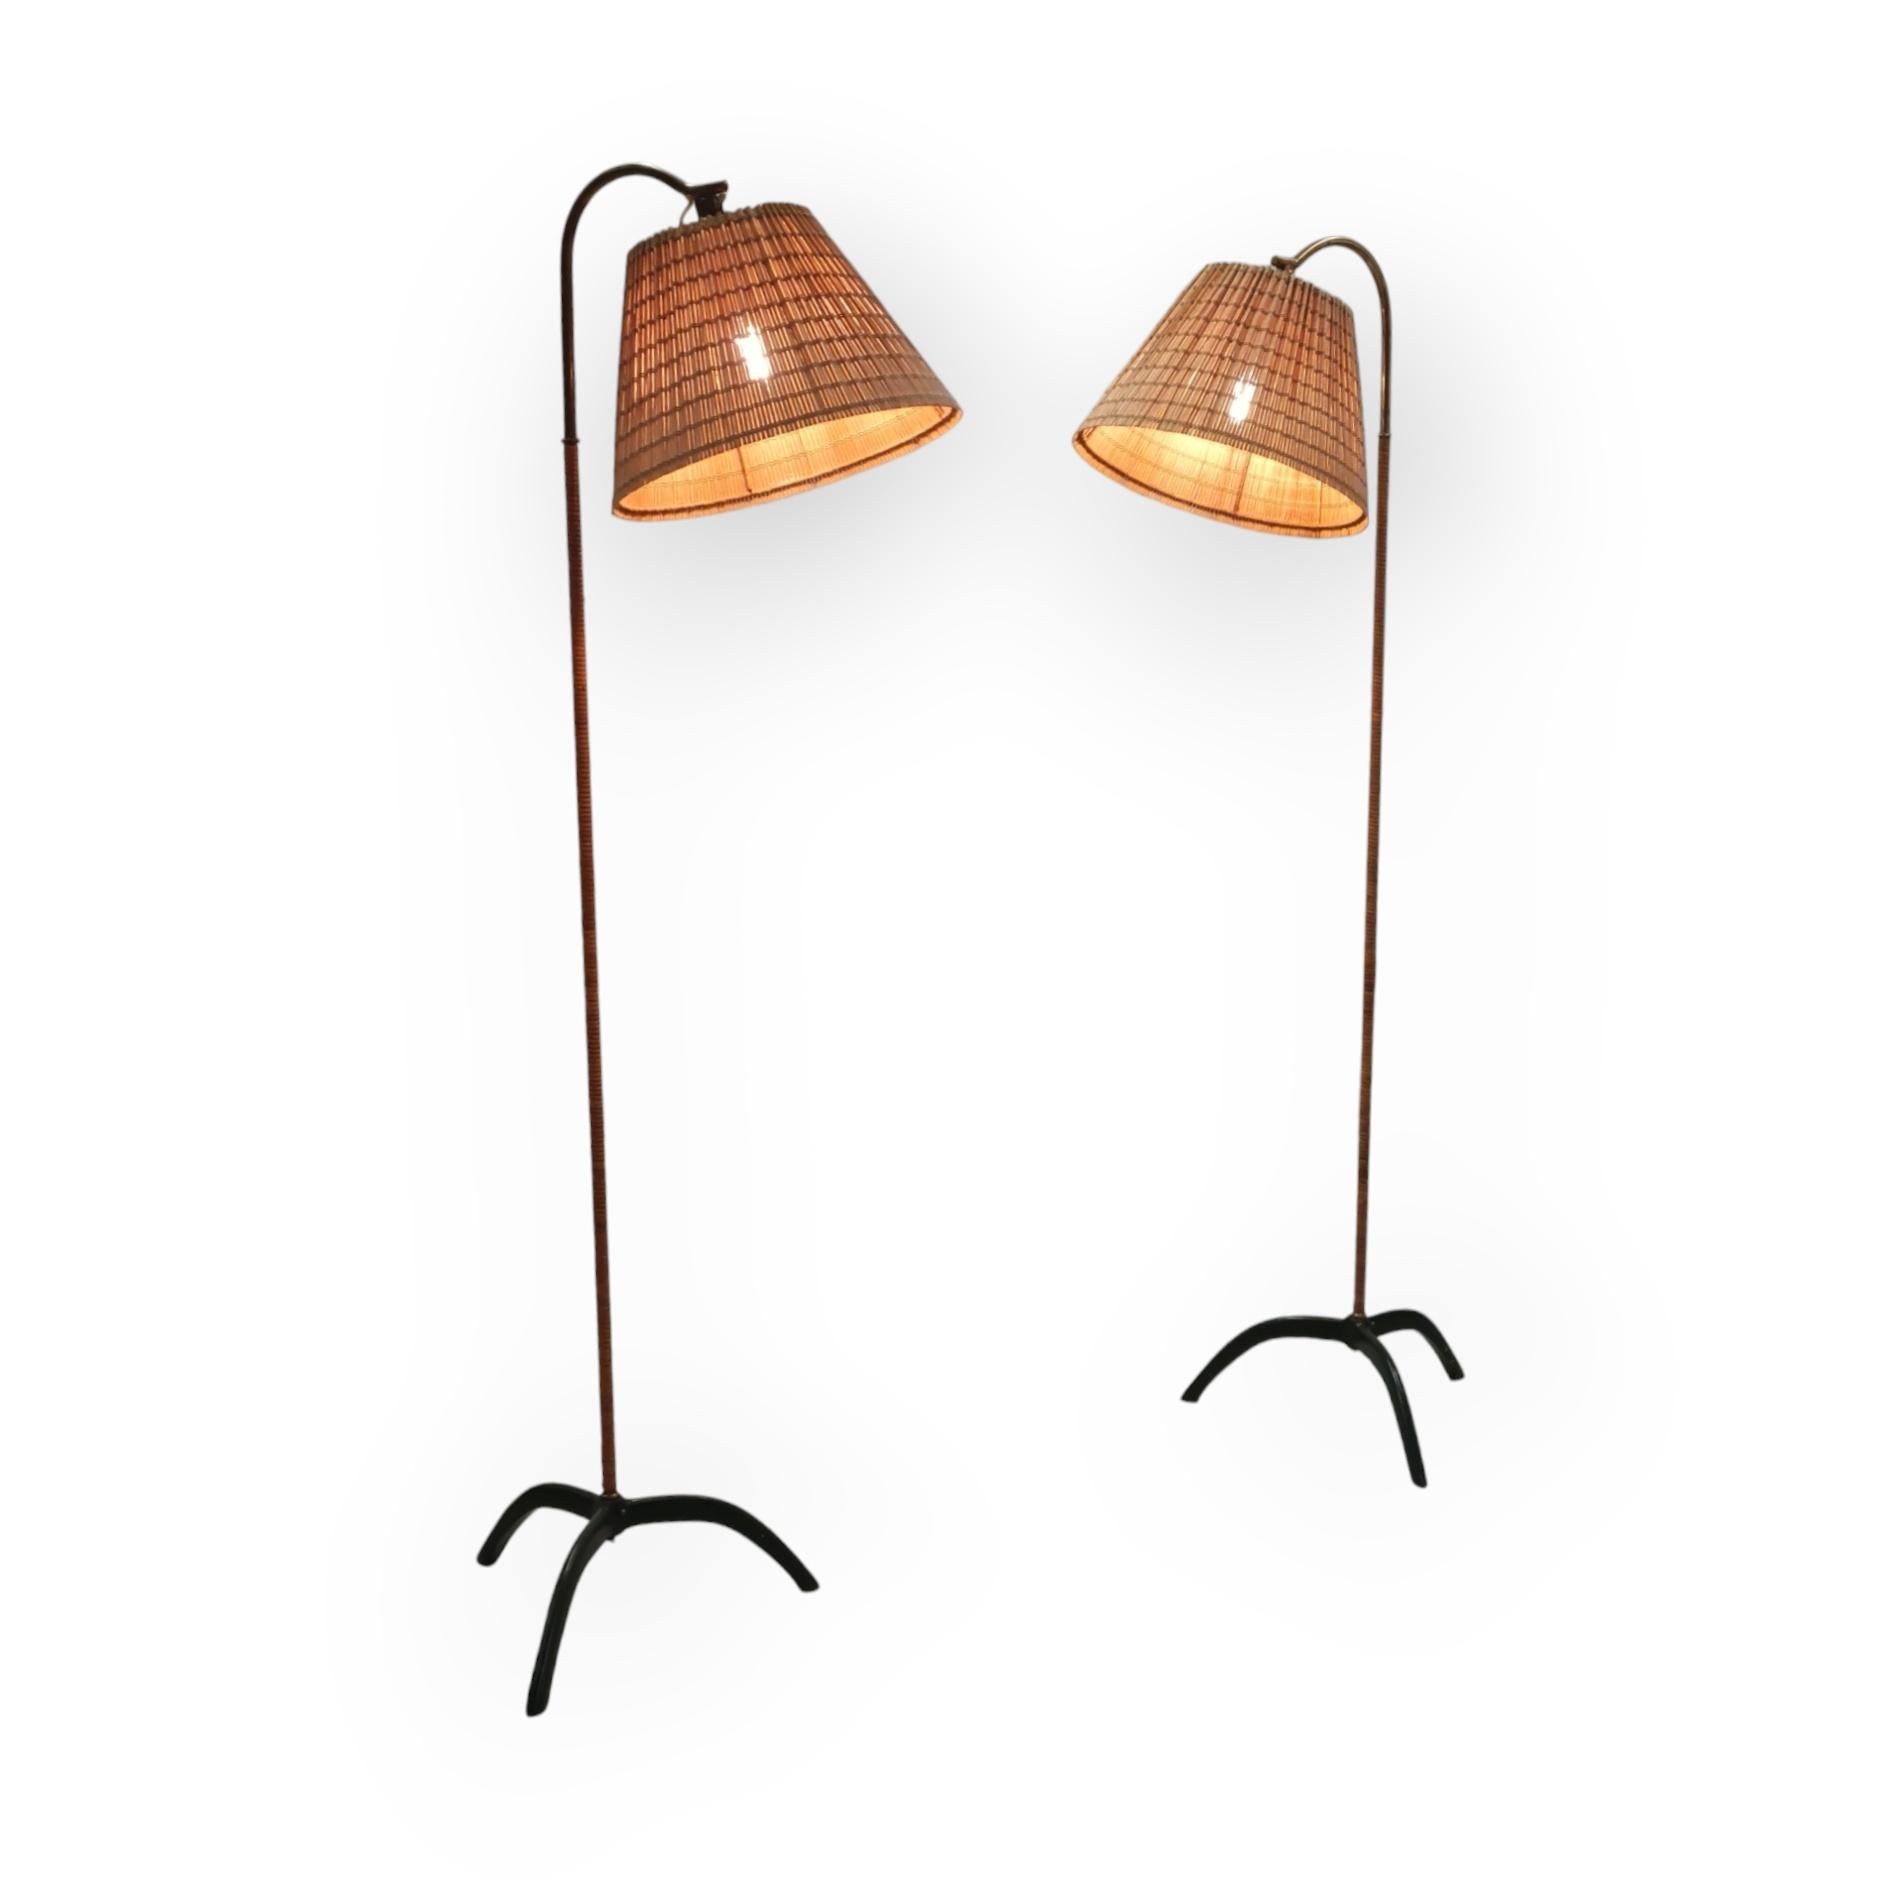 A Pair of Paavo Tynell Floor Lamps model. 9609, Taito Oy 7